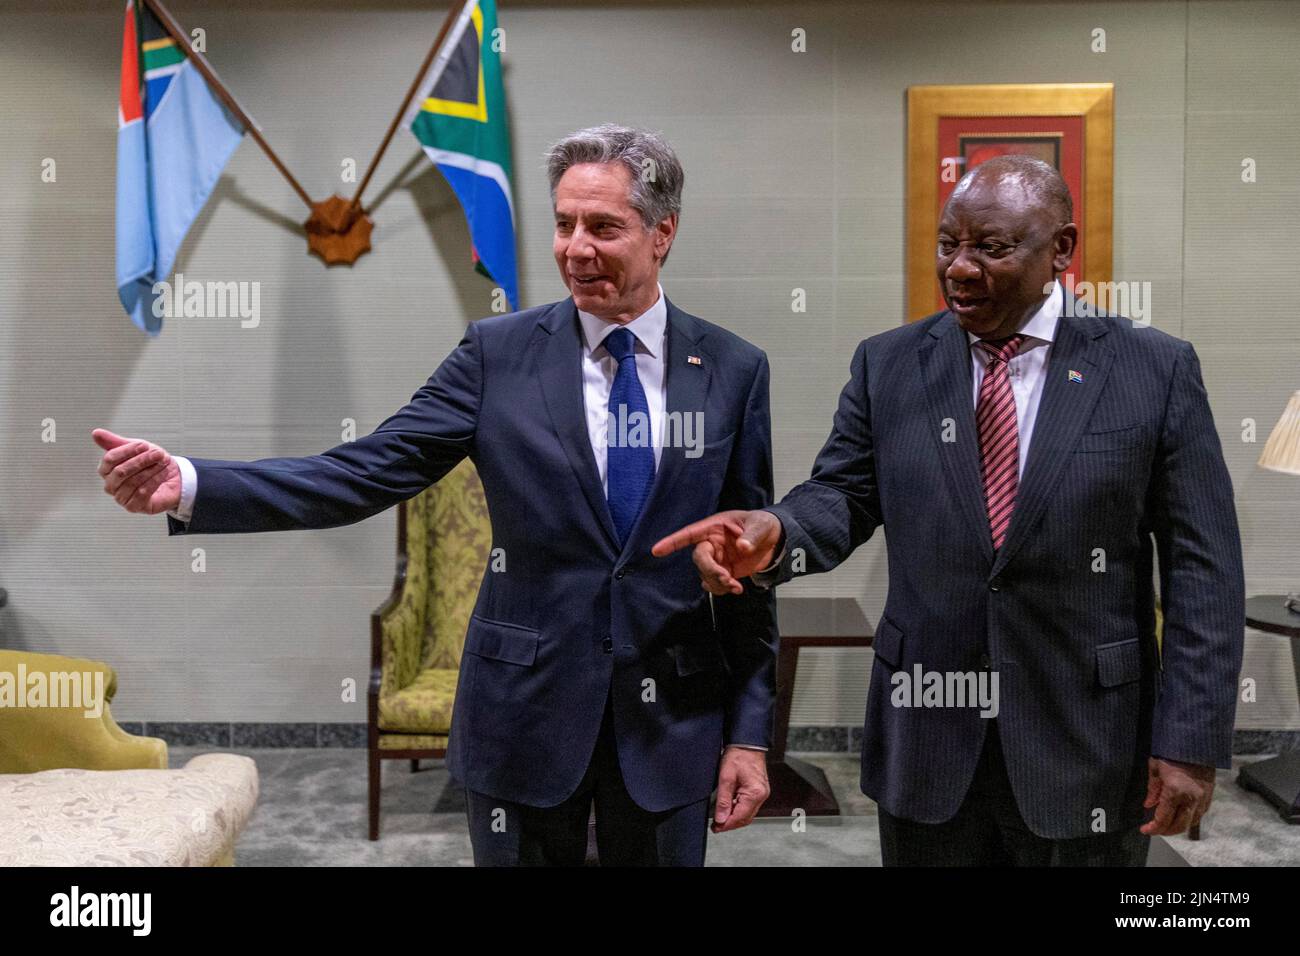 U.S. Secretary of State Antony Blinken, South Africa's President Cyril Ramaphosa ask South Africa's Foreign Minister Naledi Pandor (not in picture) to join them as they pose for a photo on the sidelines of their meeting at Waterkloof Airforce Base in Centurion, South Africa, August 9, 2022. Andrew Harnik/Pool via REUTERS        TPX IMAGES OF THE DAY Stock Photo